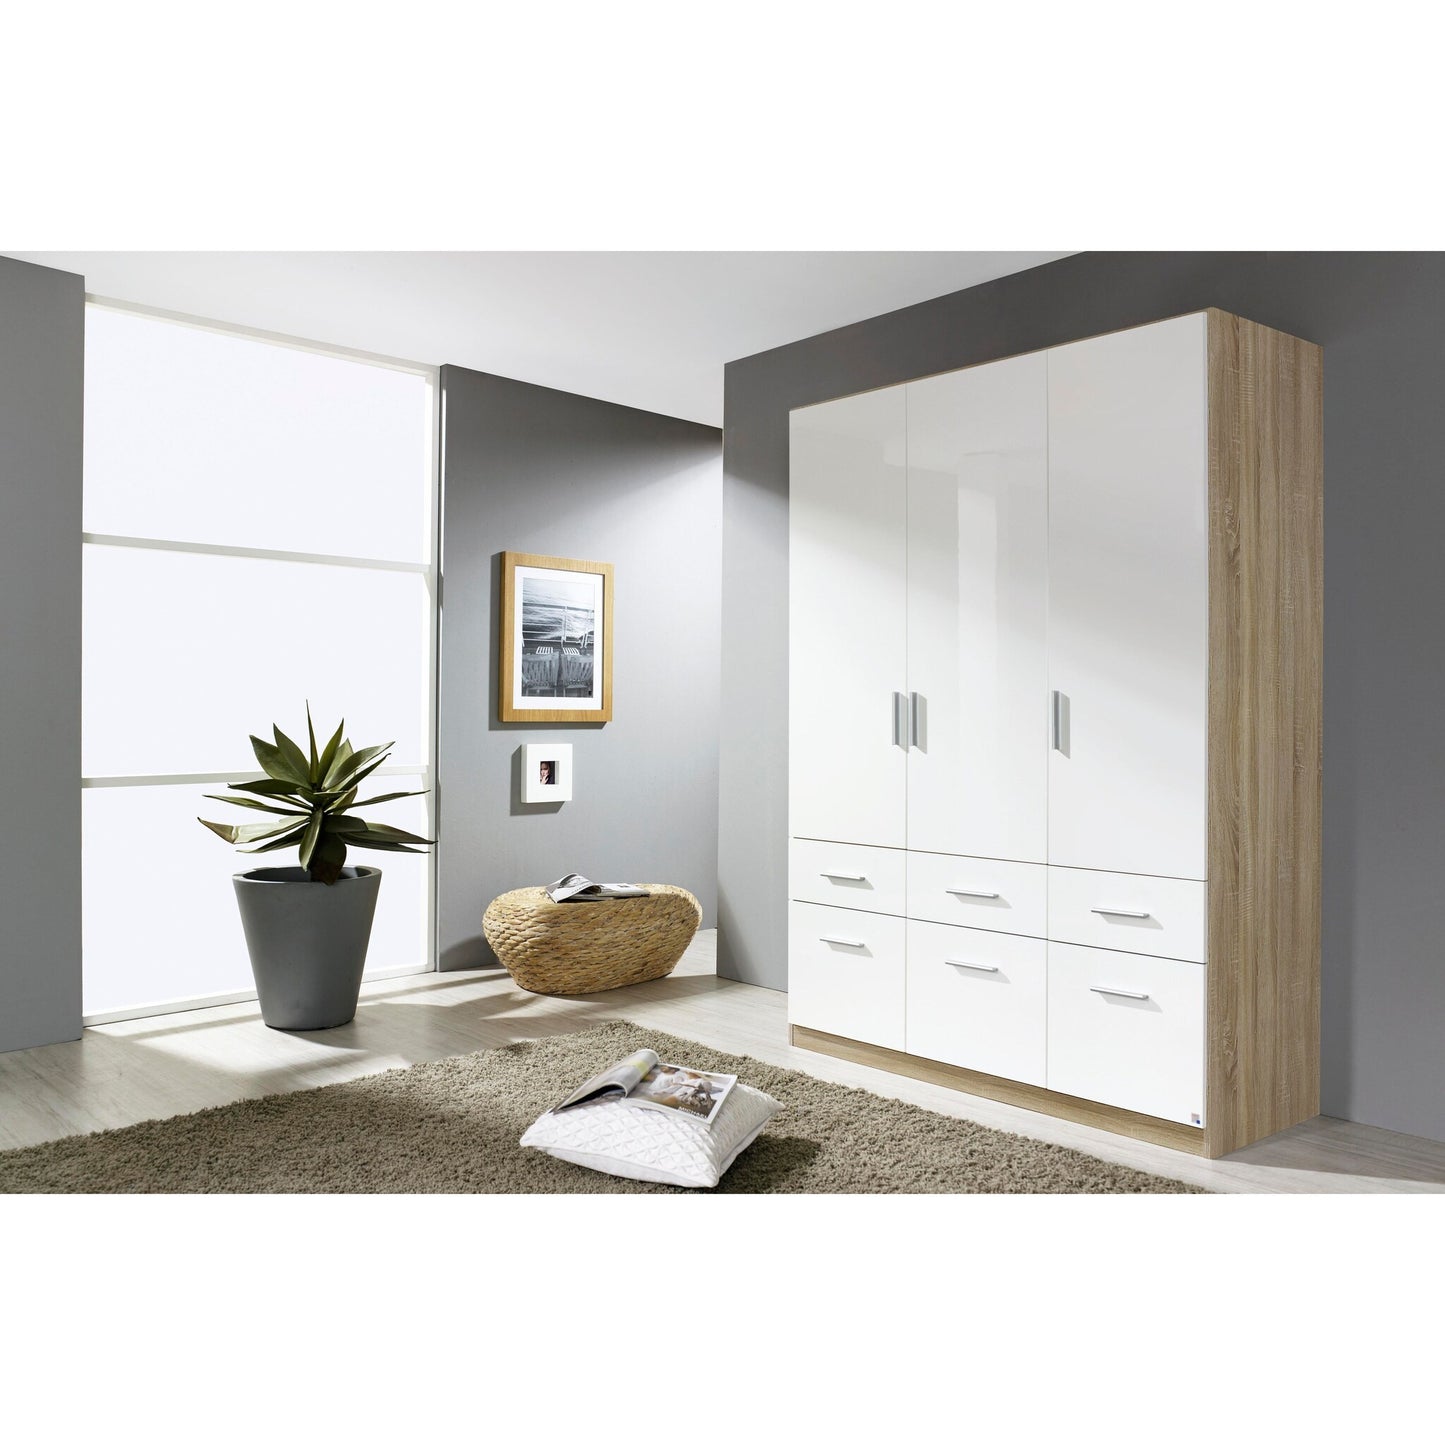 Rauch Celle High Gloss White 3 Door Wardrobe with Drawers